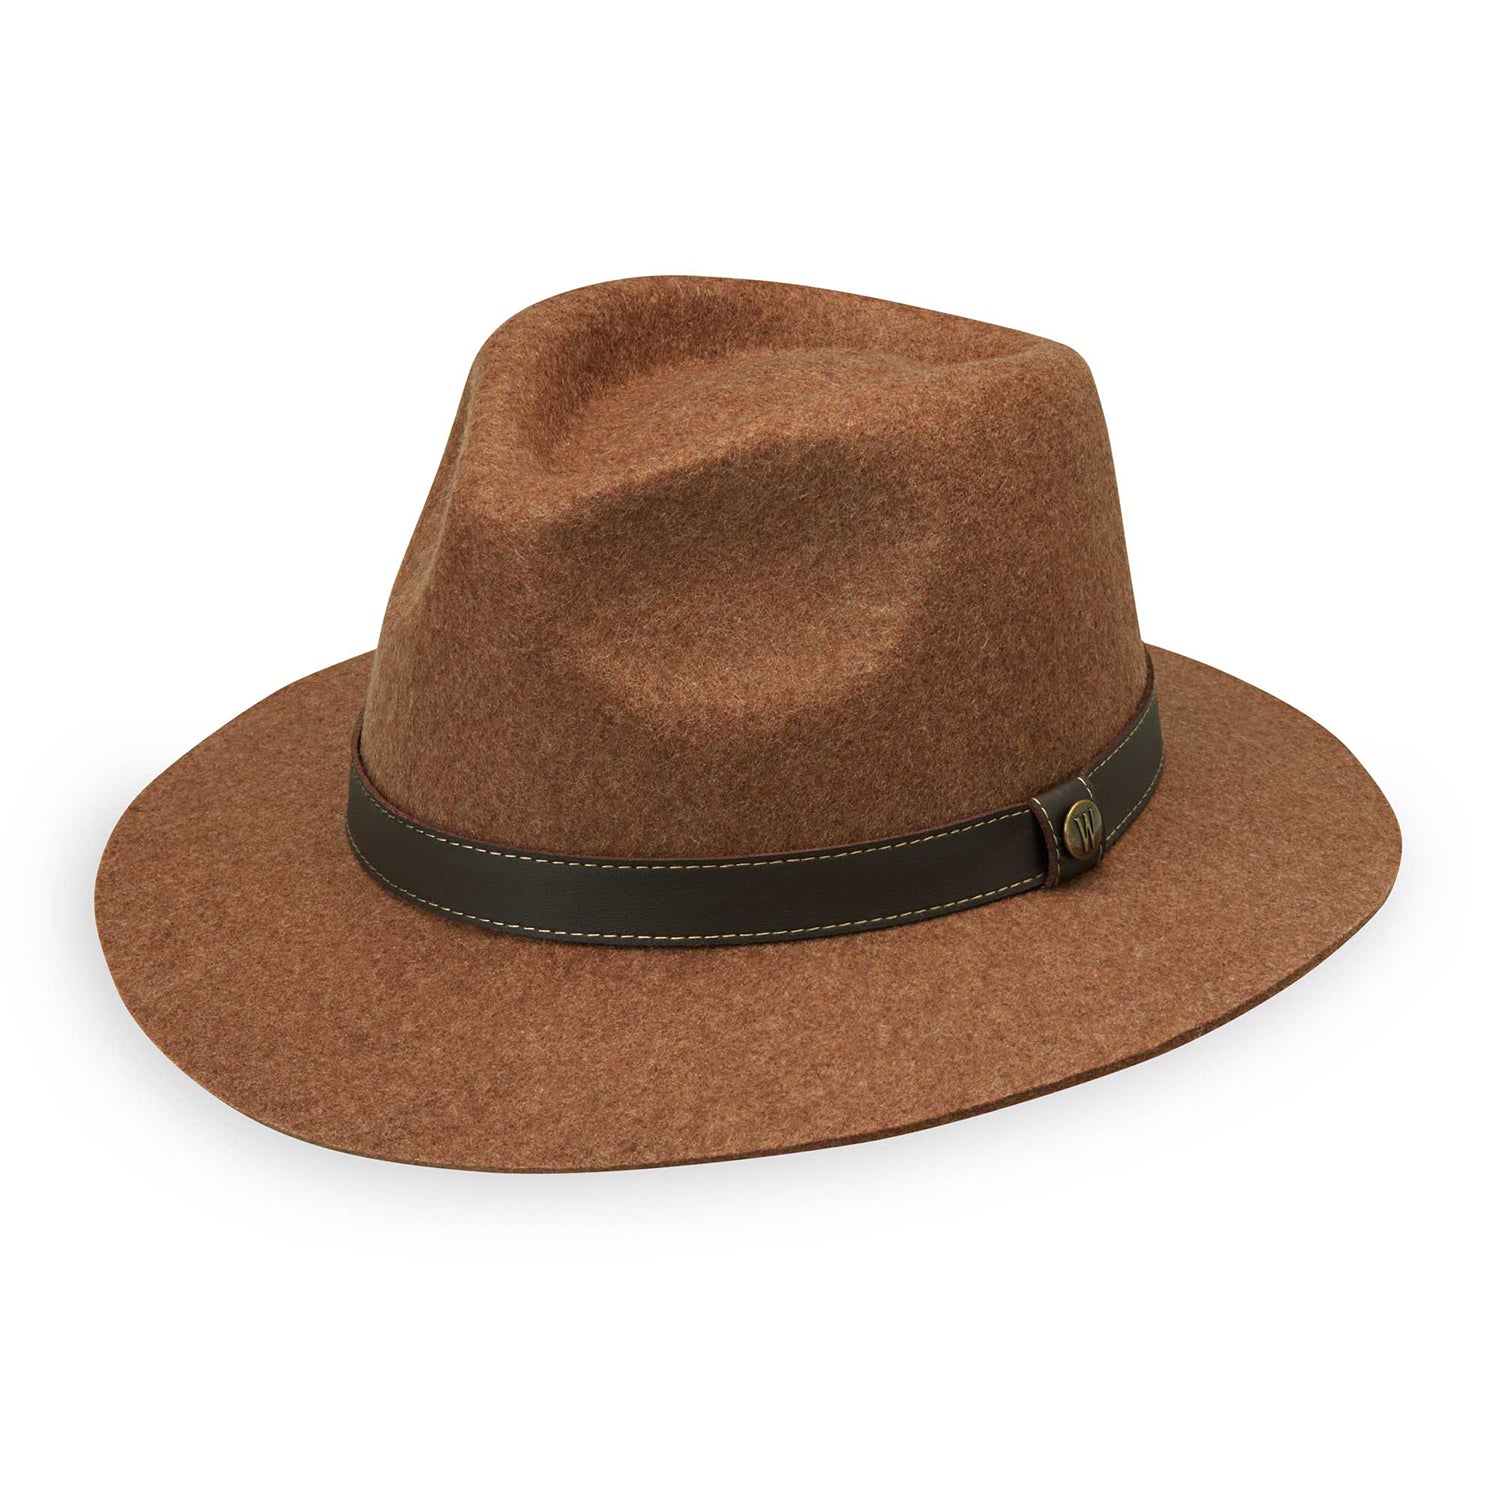 Featuring Durango fedora winter sun hat, featuring a UPF 50+ rating and made of wool-felt material